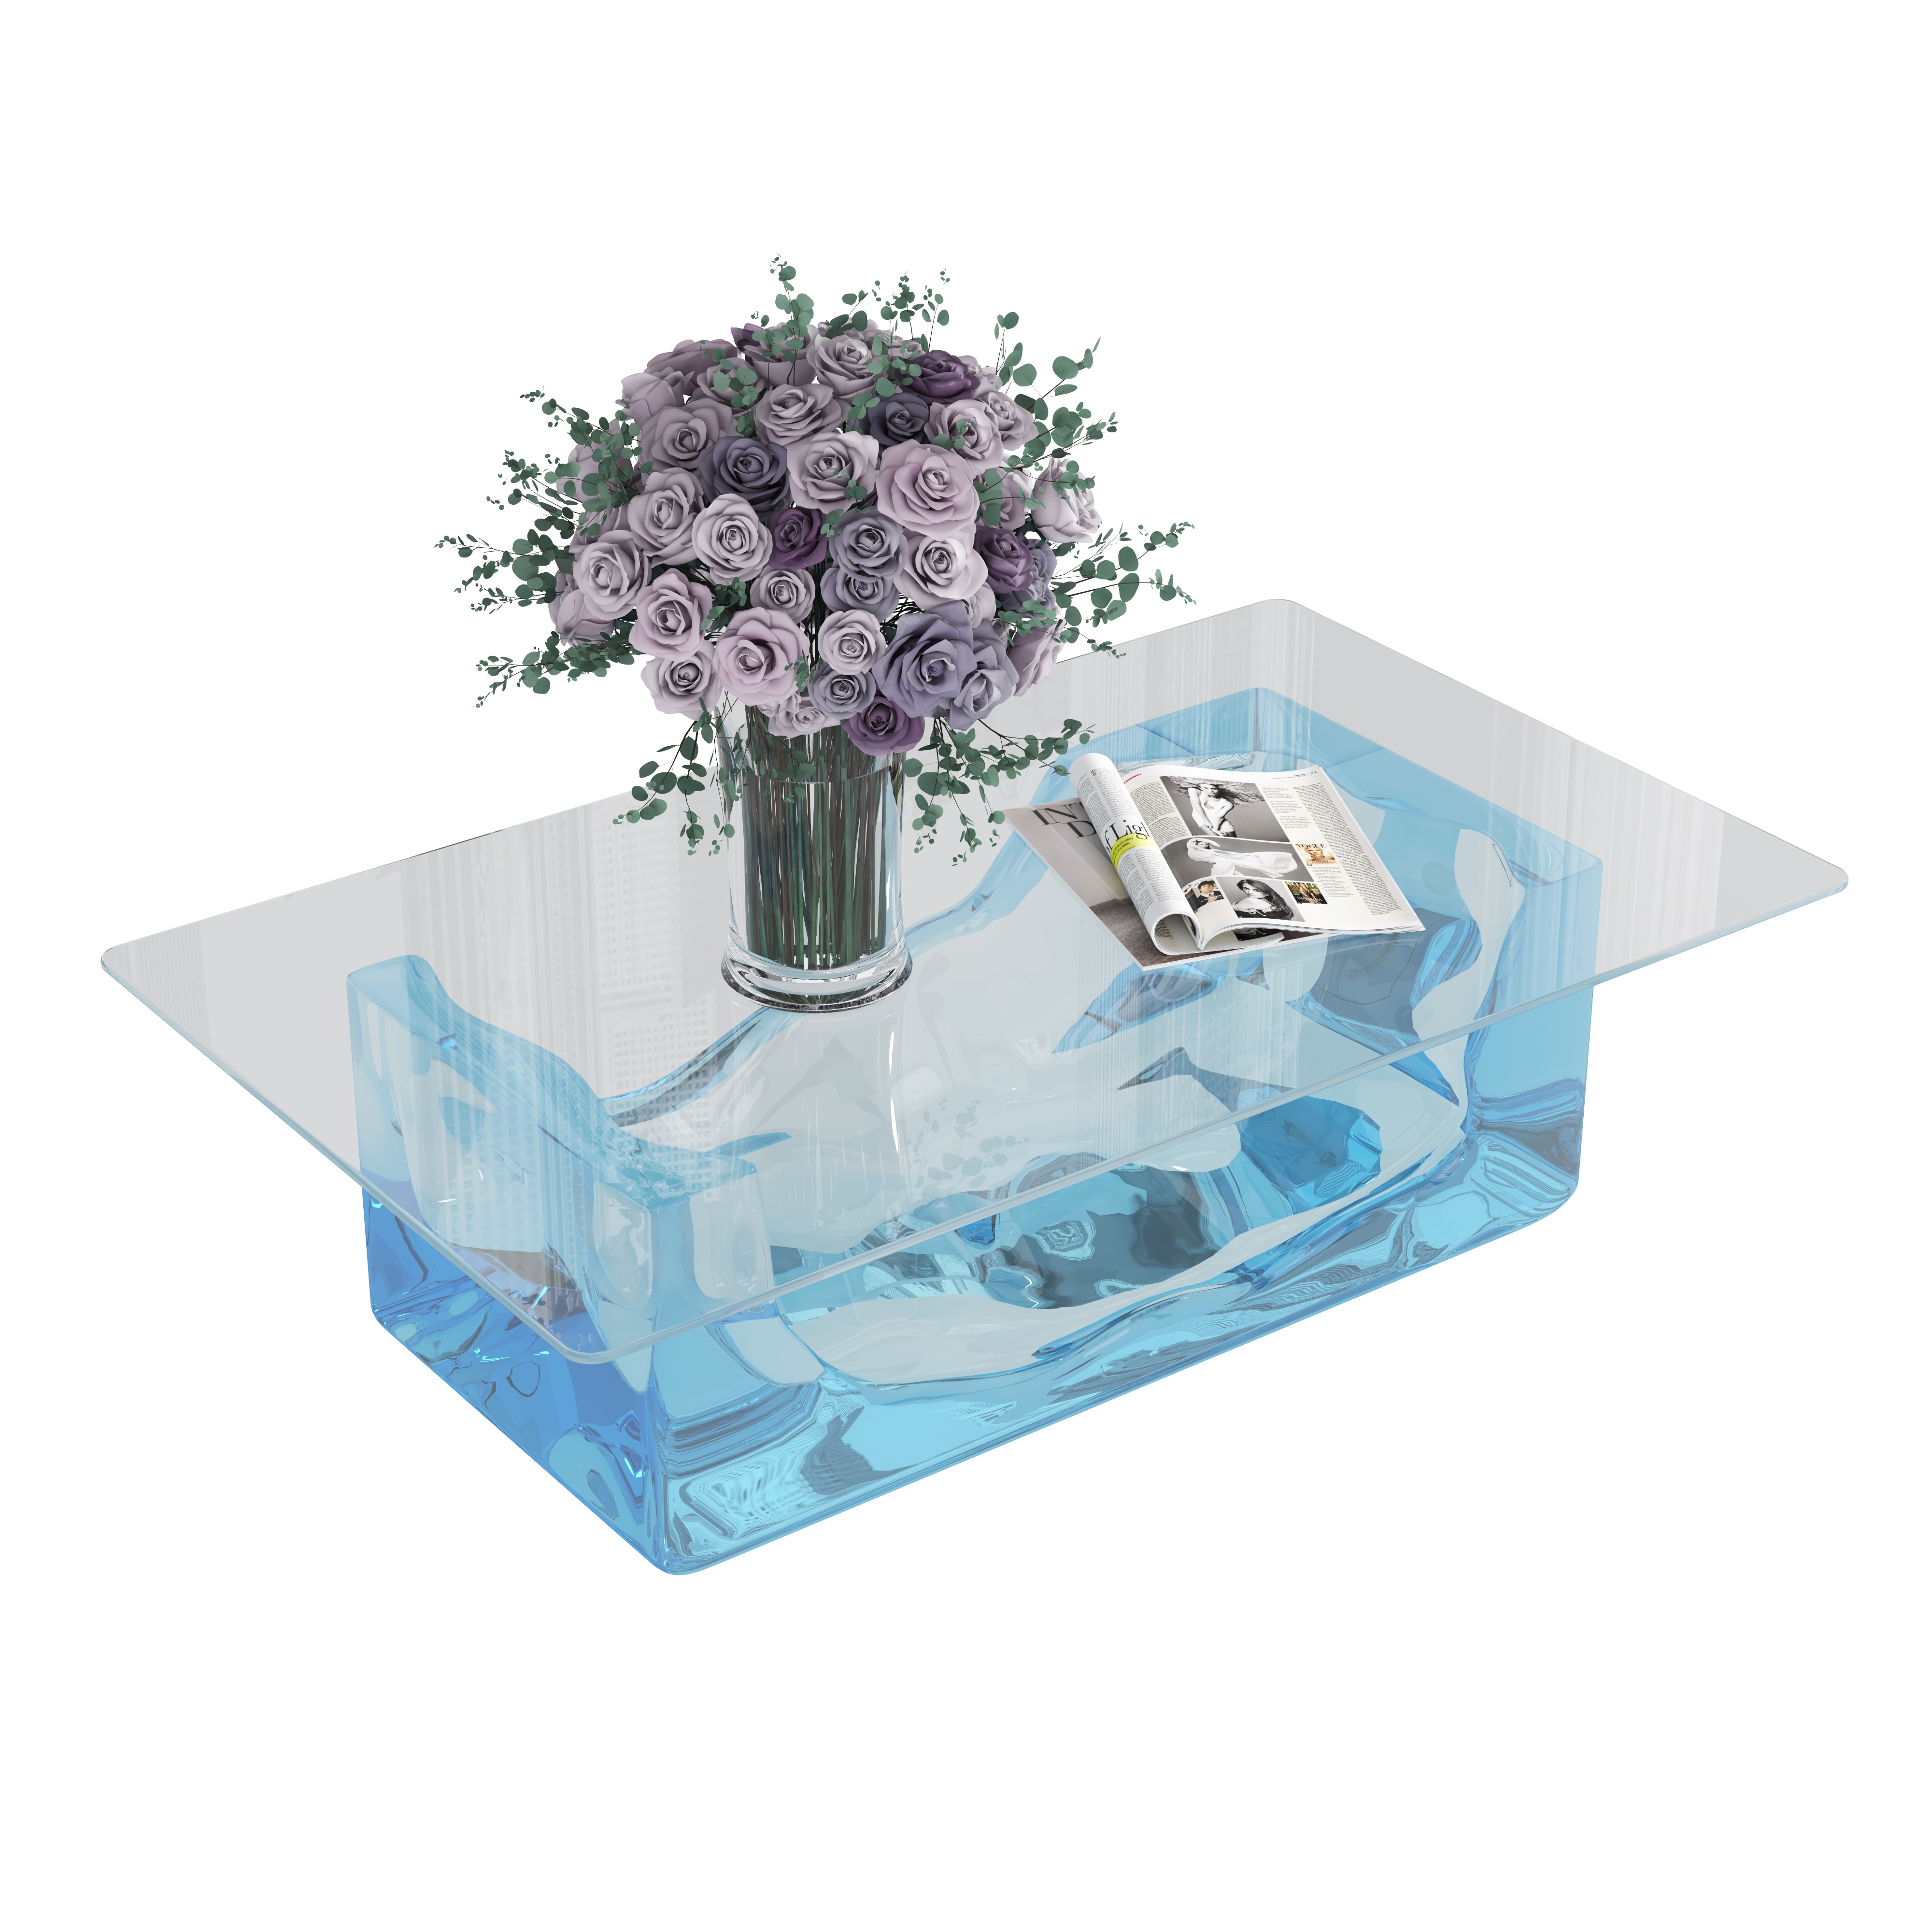 Ice sculpture coffee table